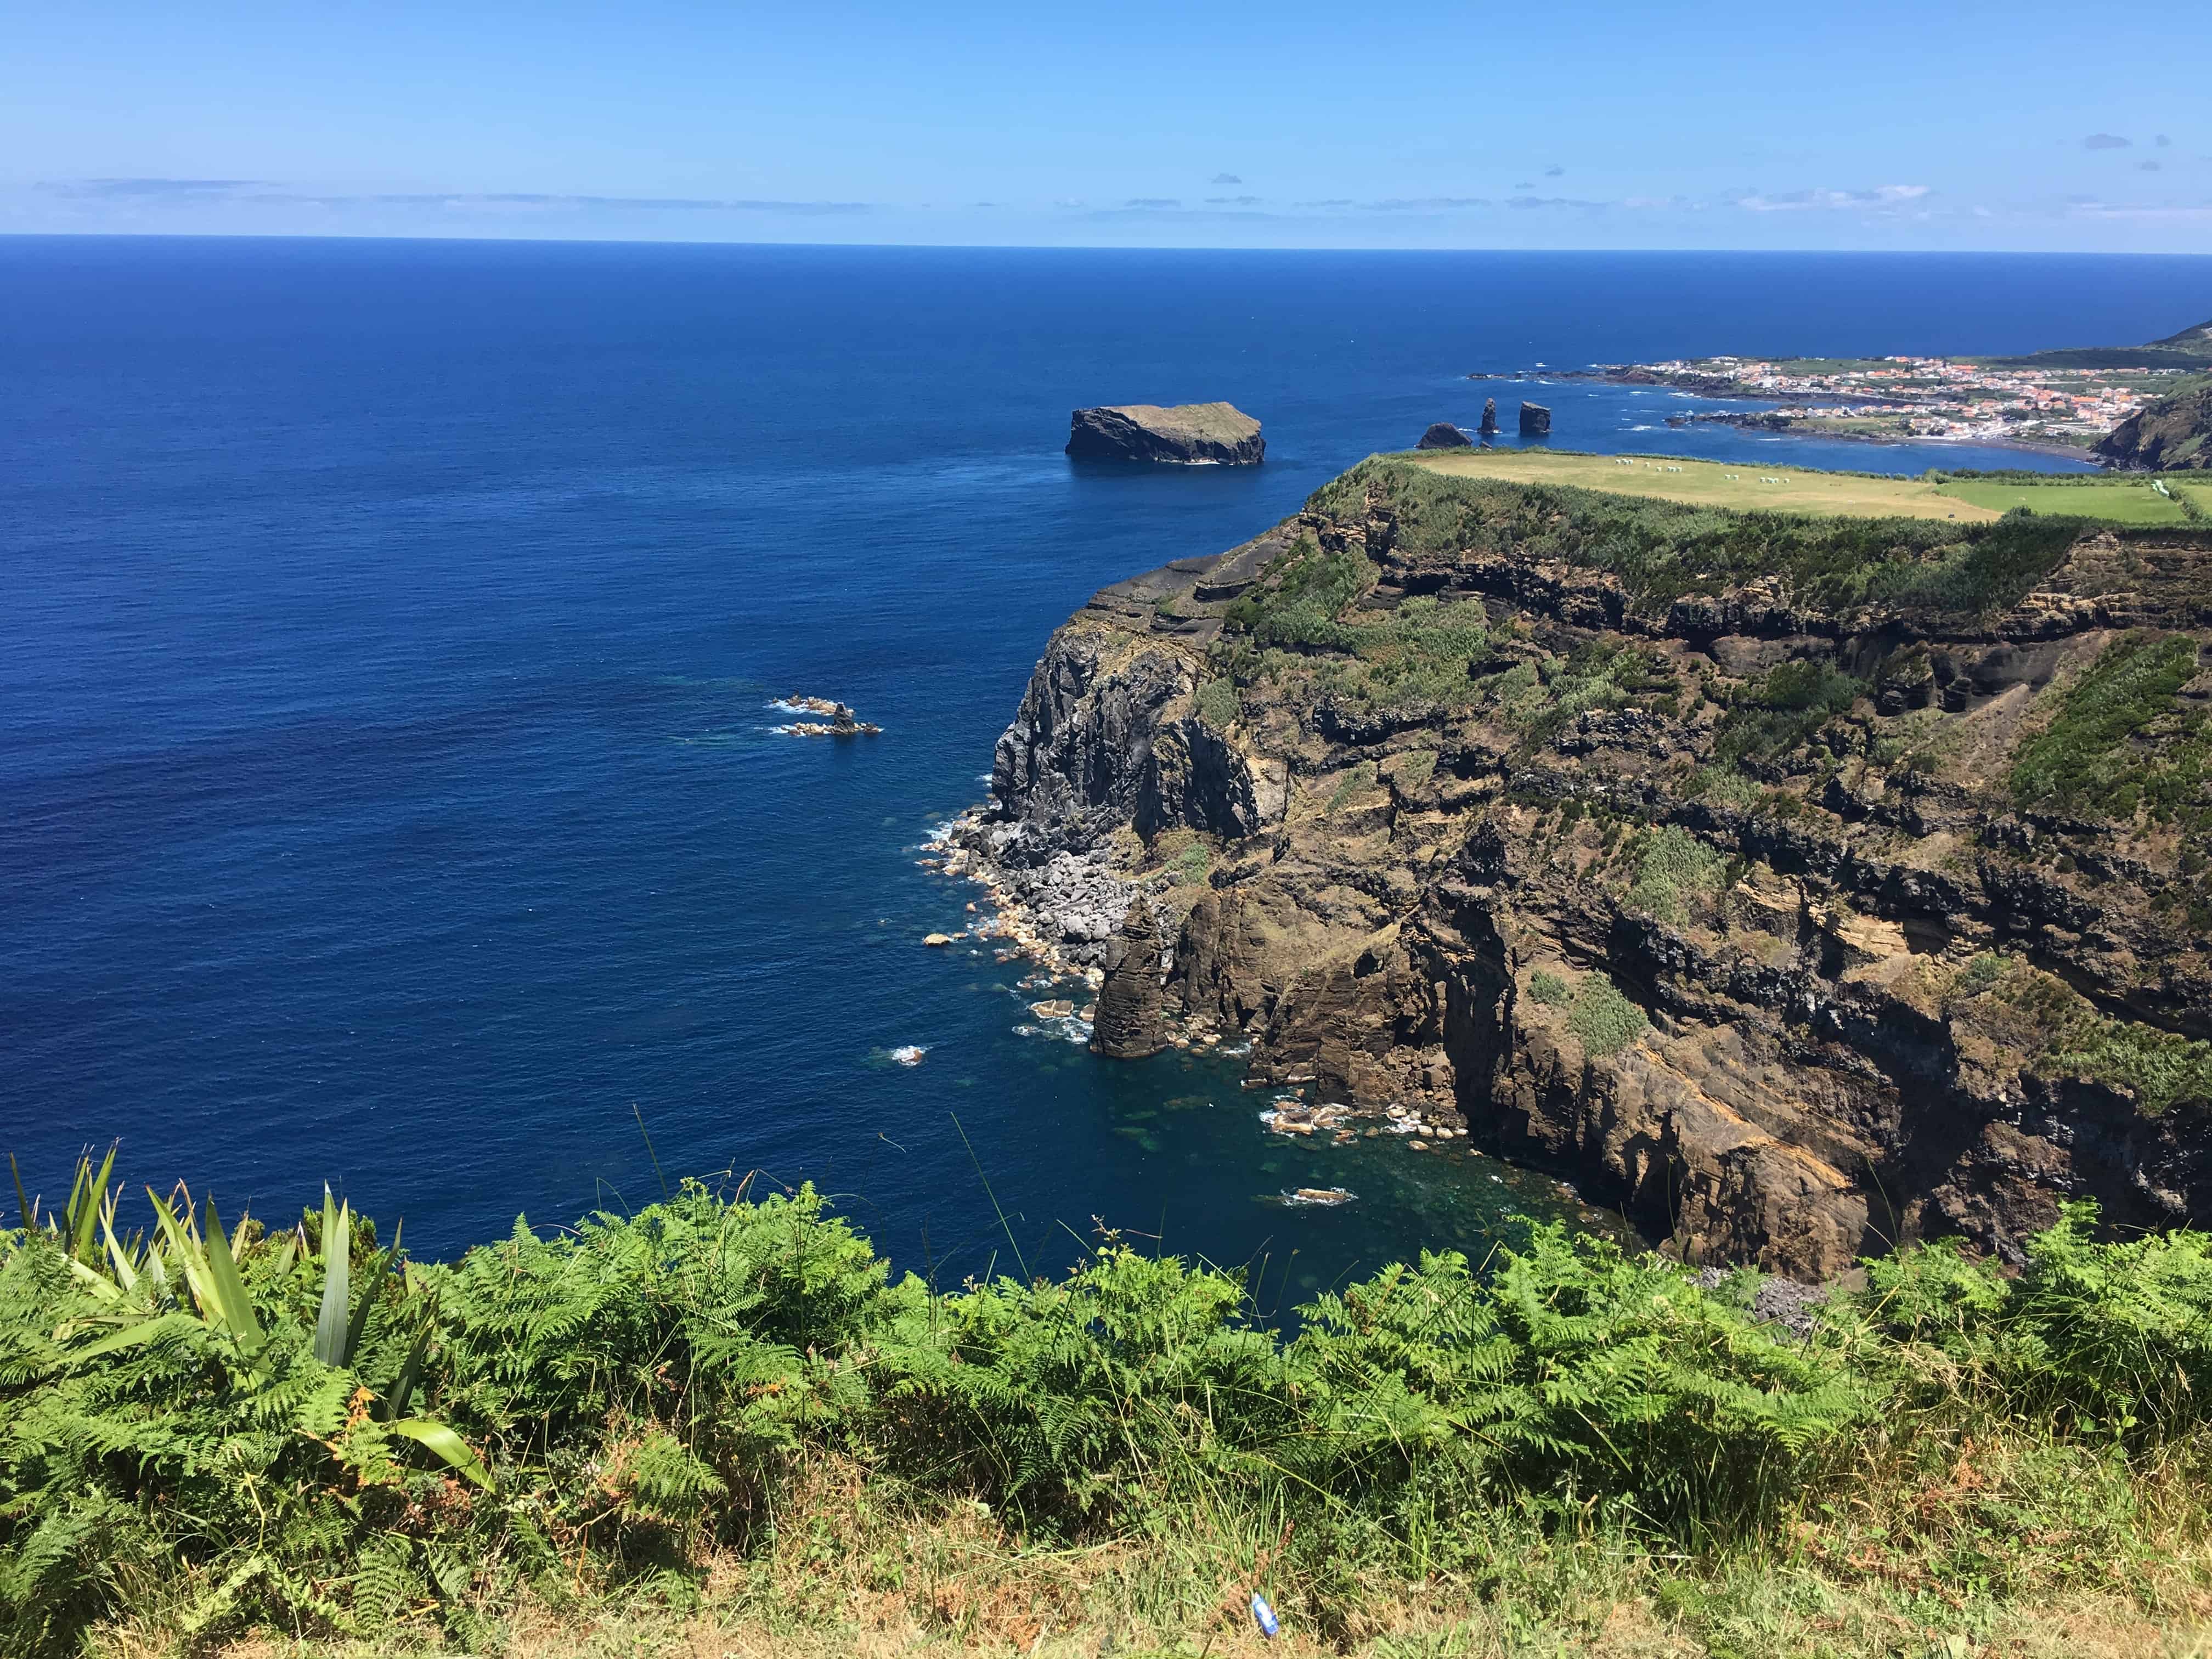 One of the many splendid views, Sao Miguel, Azores